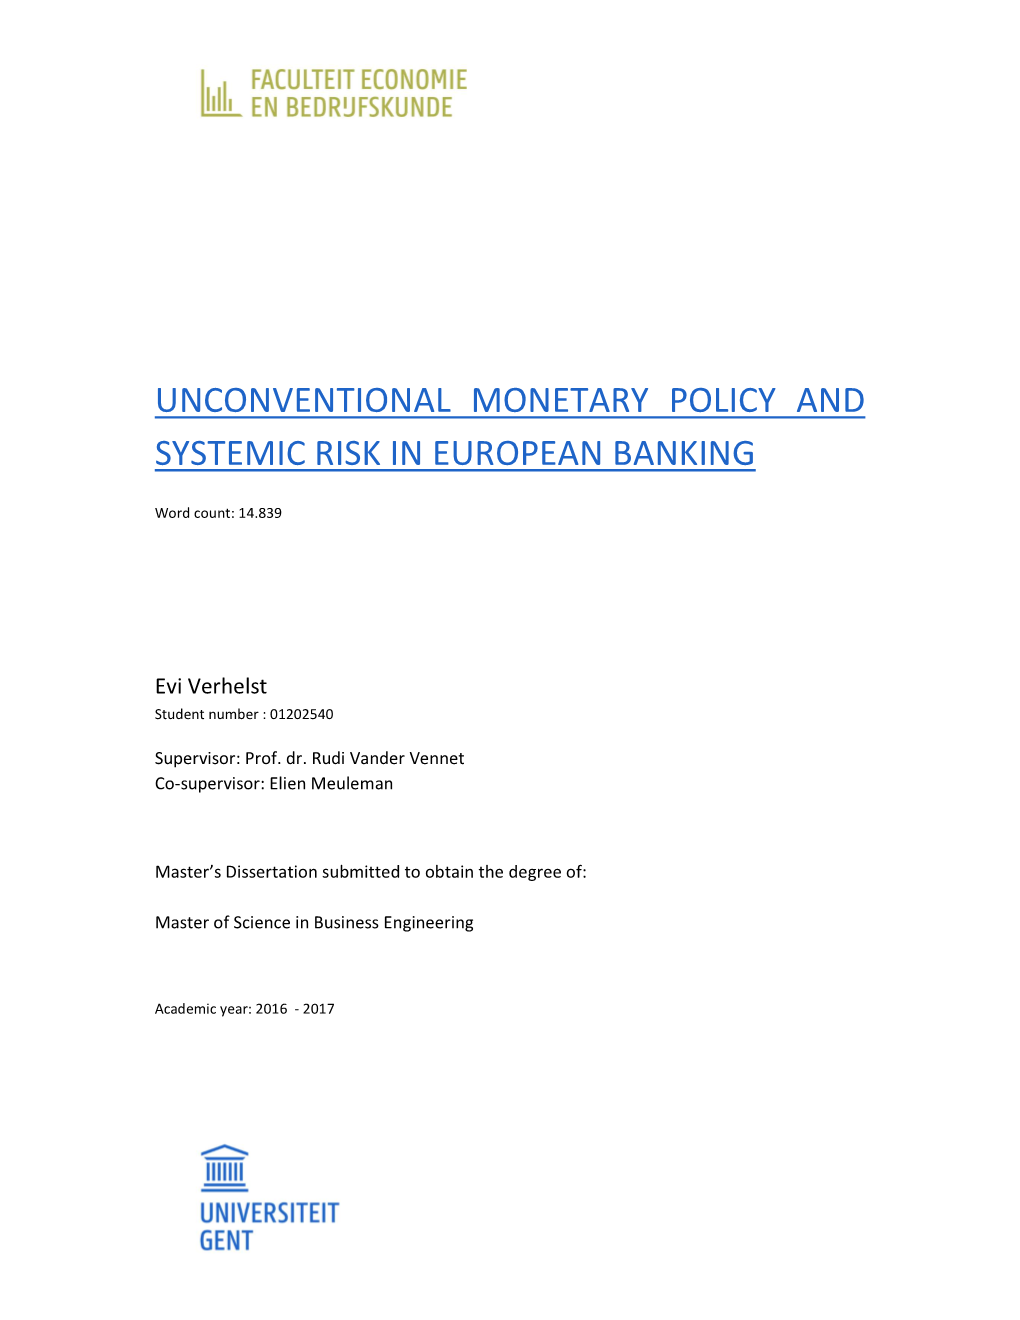 Unconventional Monetary Policy and Systemic Risk in European Banking